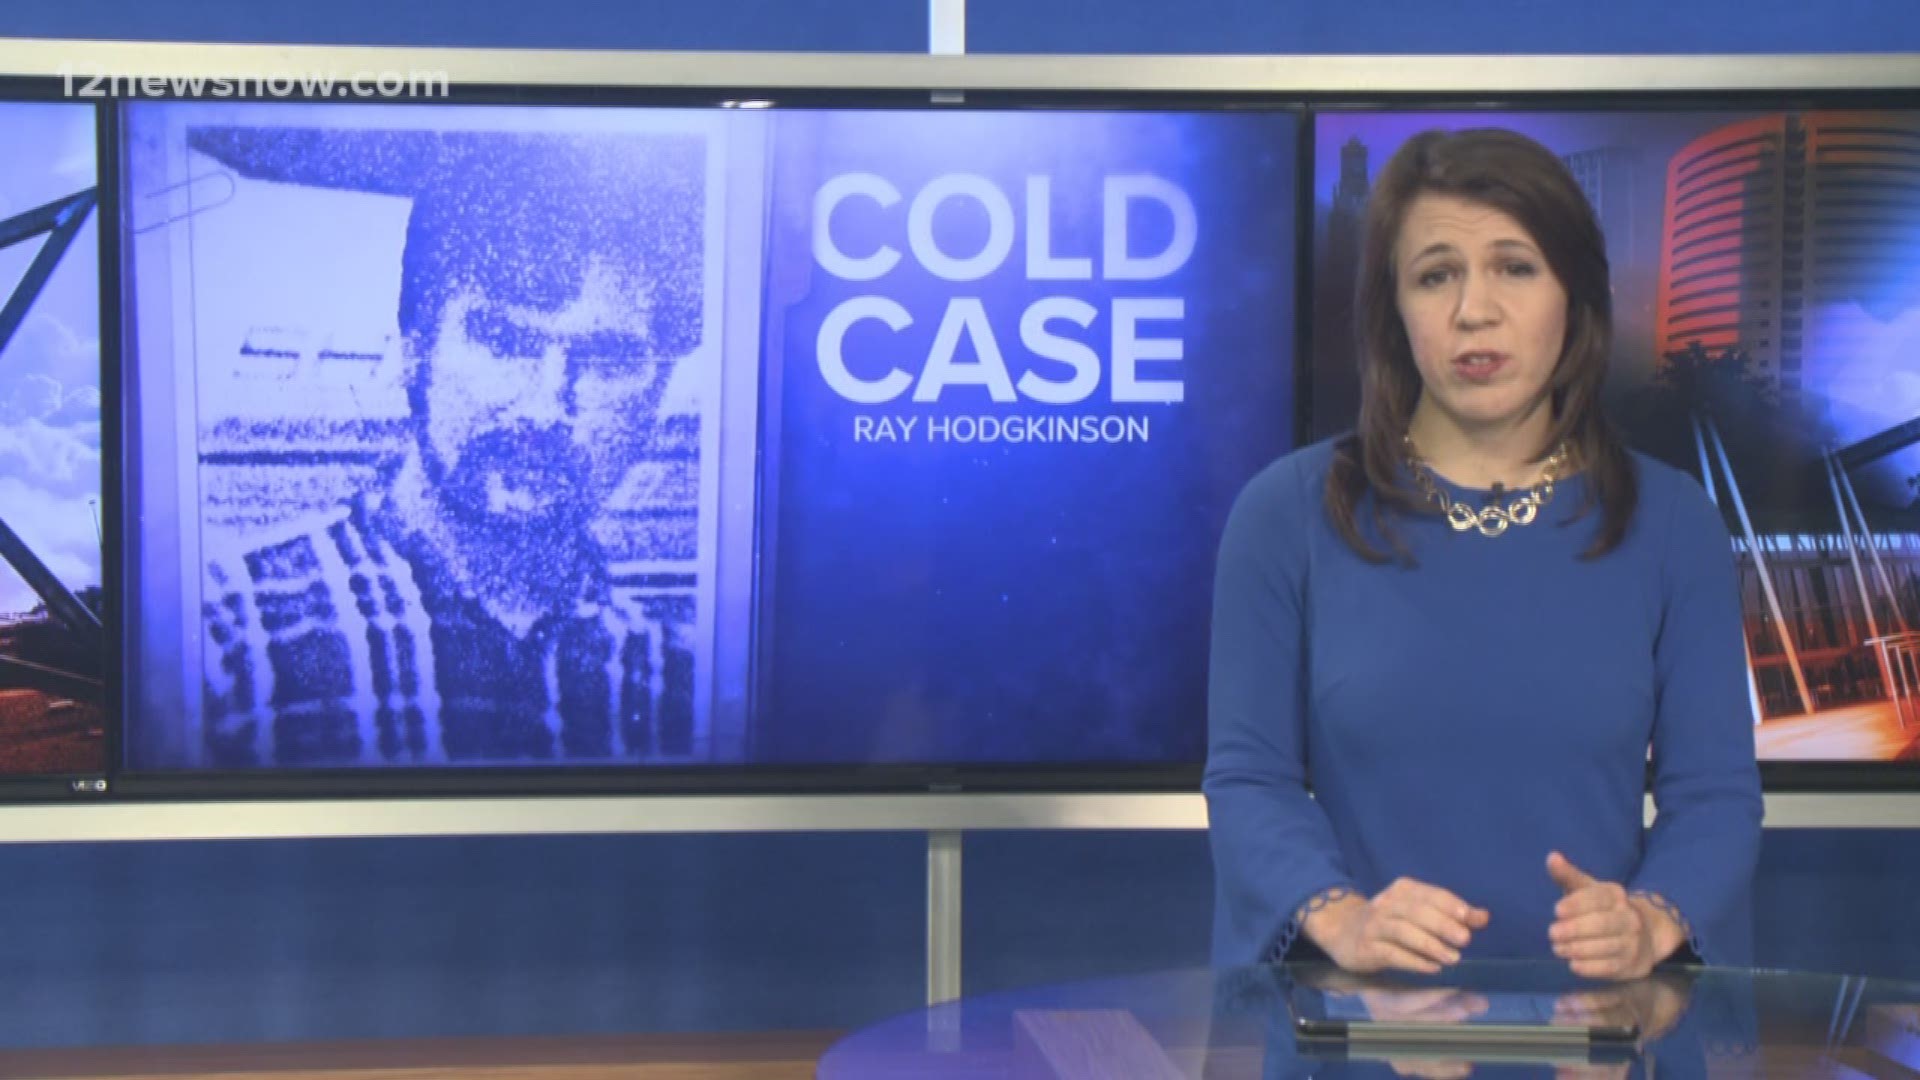 Cold Case: Pinehurst man missing since 1988, believed to be murdered